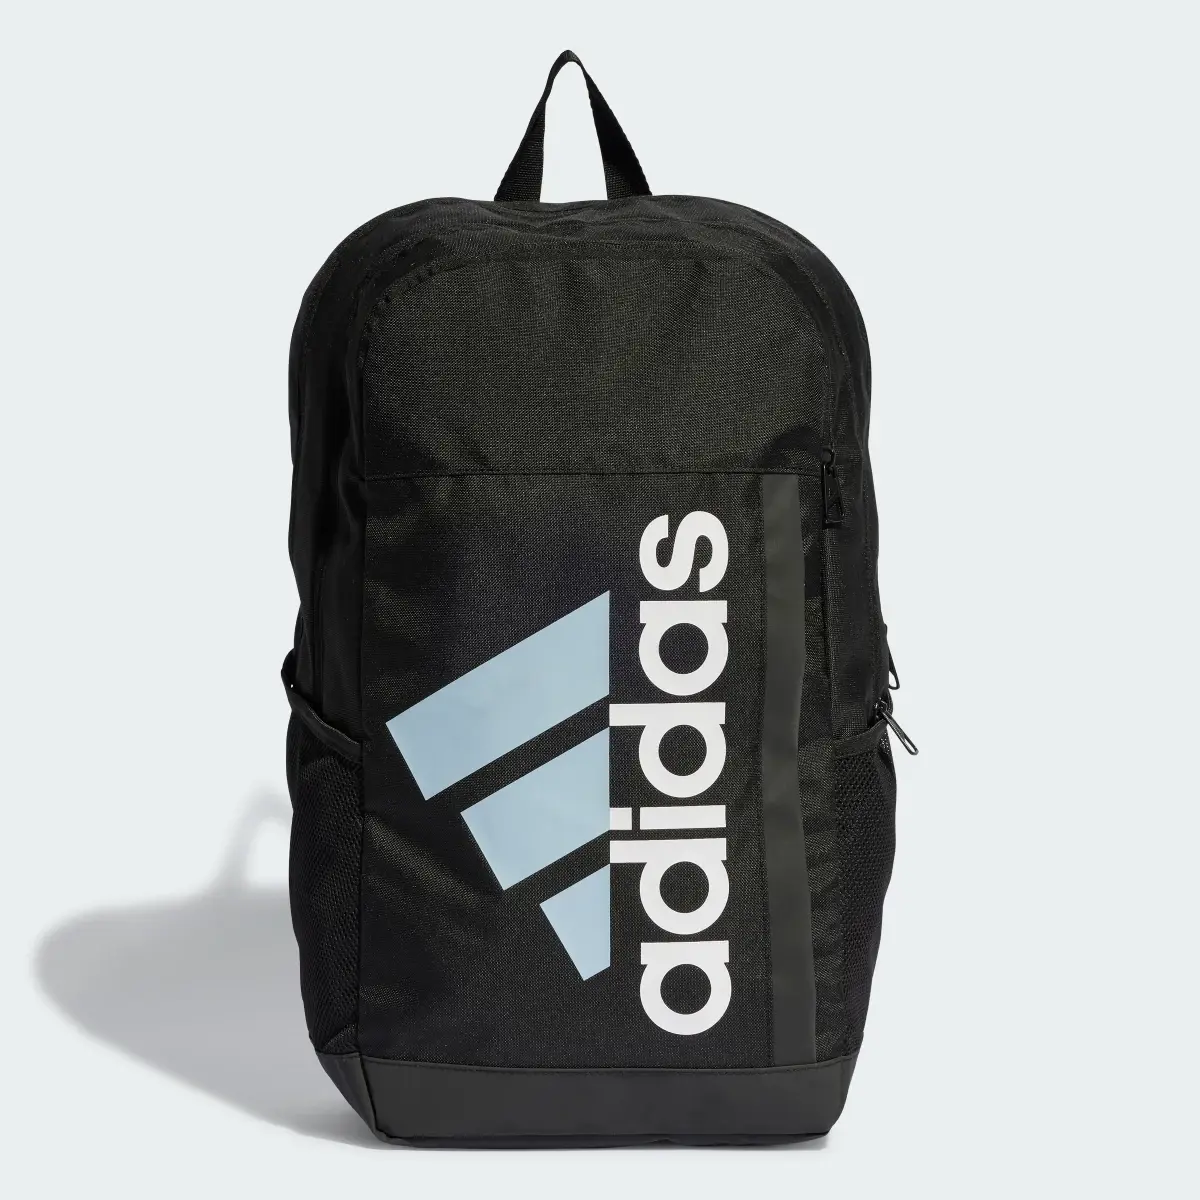 Adidas Motion SPW Graphic Backpack. 1